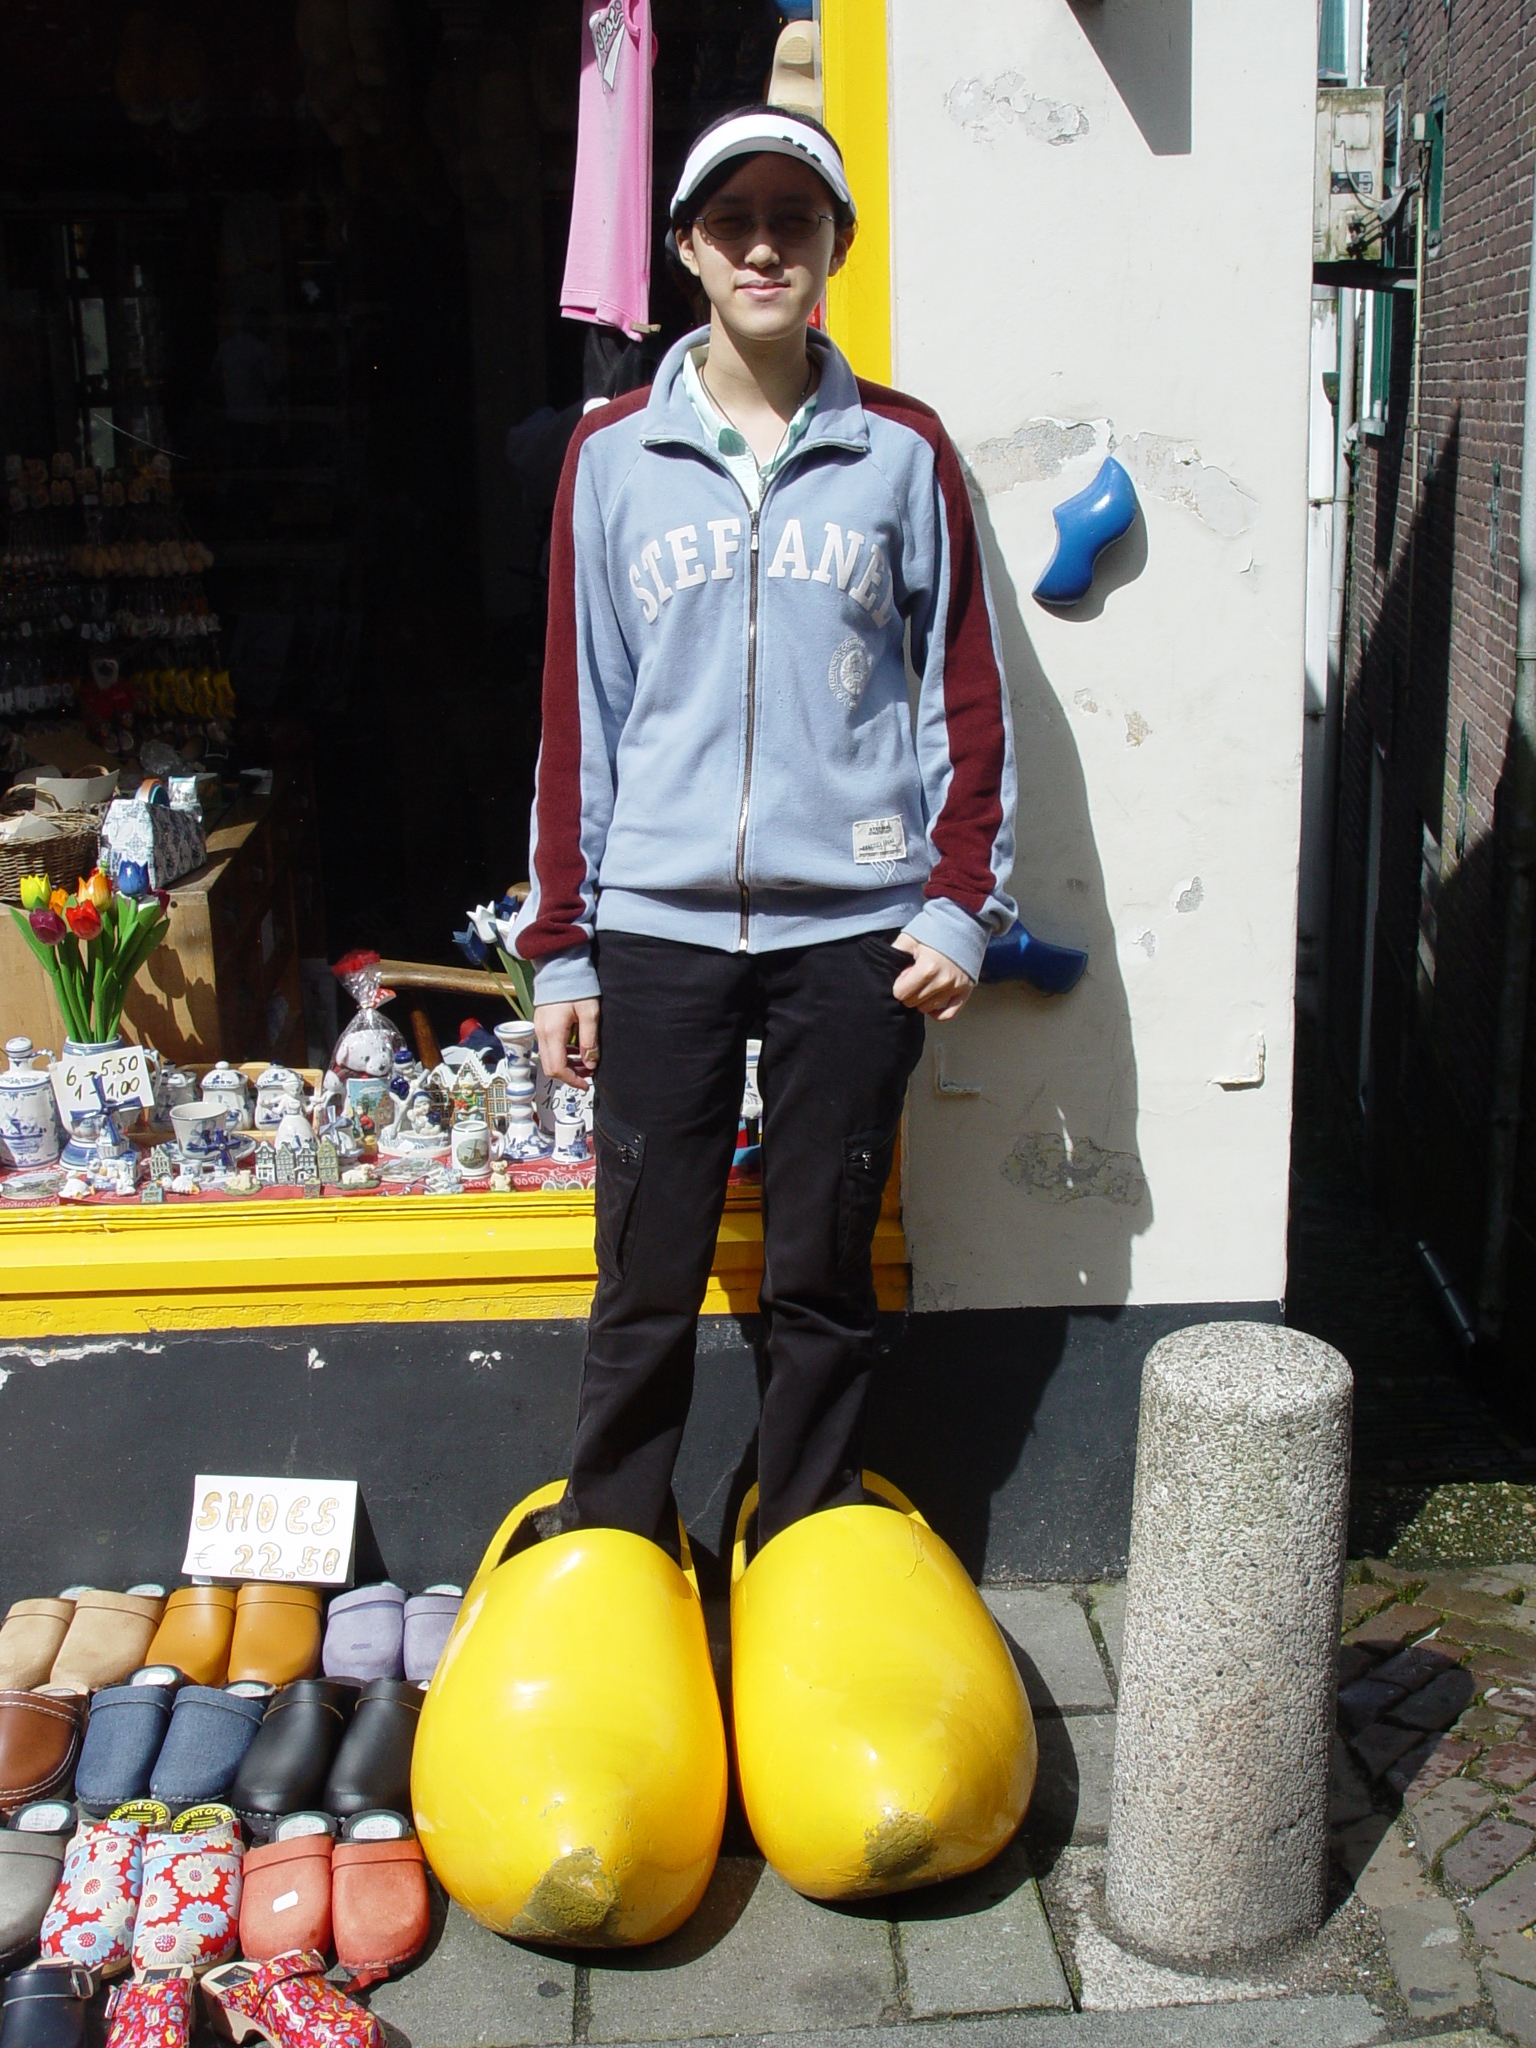 Huge wooden shoes photo